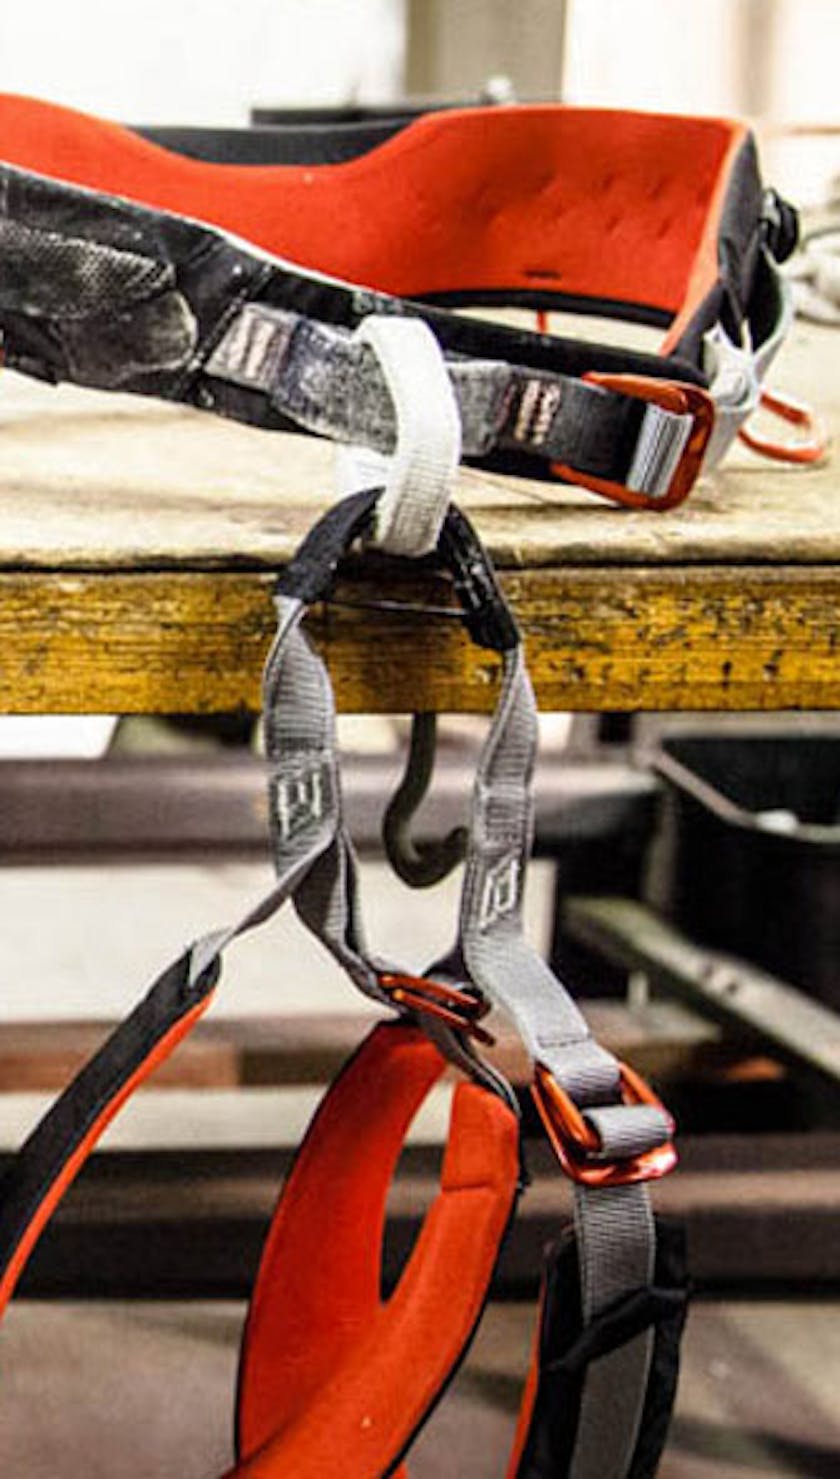 multiple harnesses hanging off a work bench